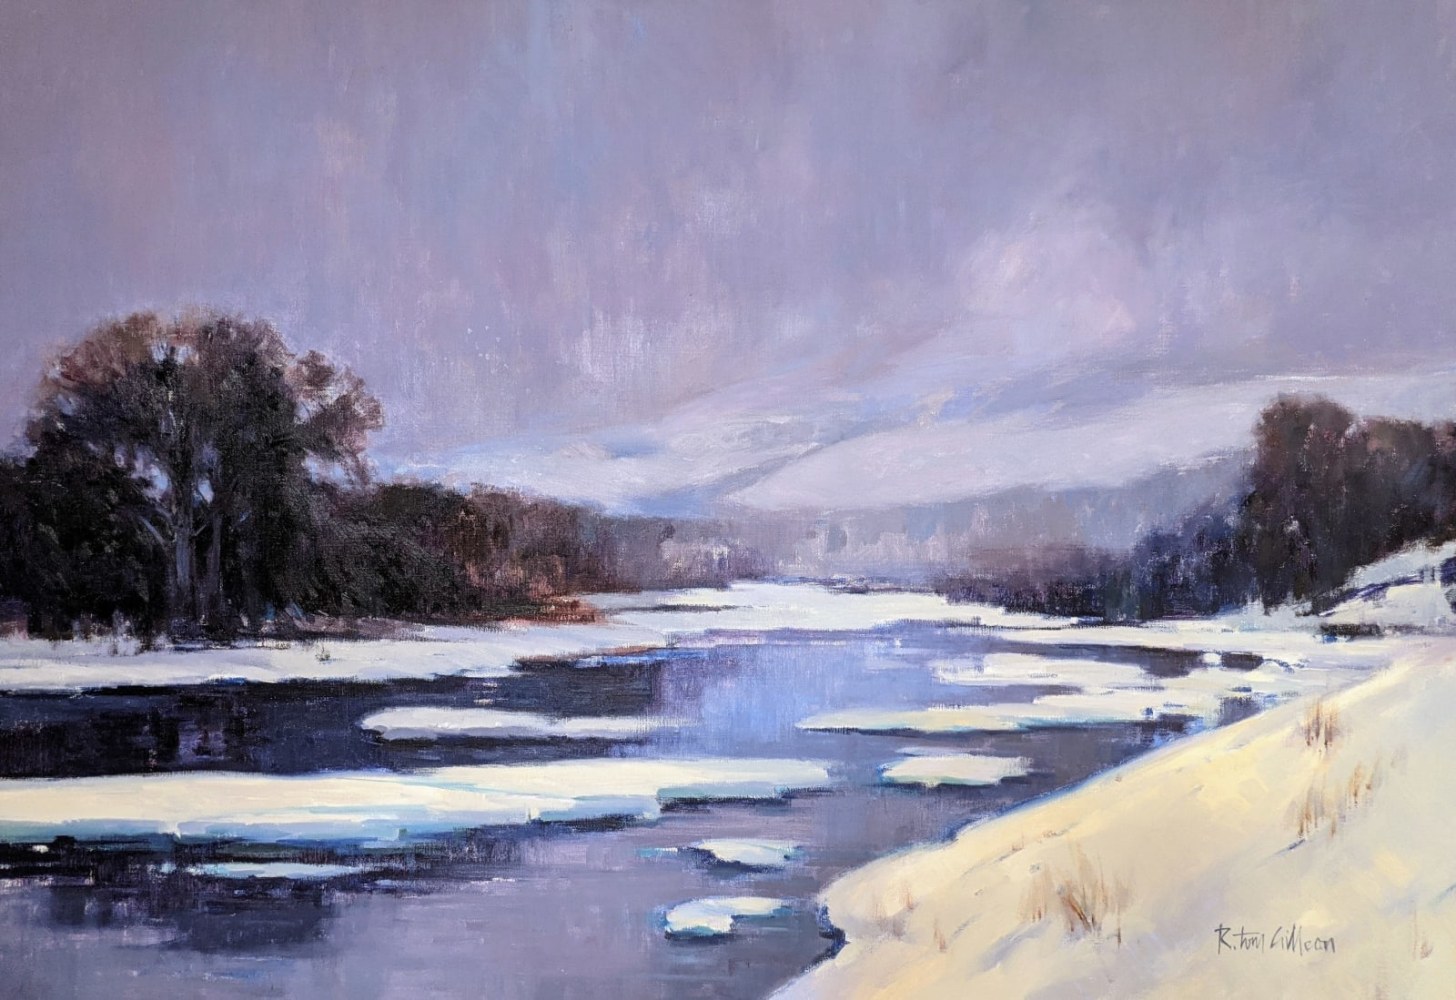 Missouri River Winter

Oil on canvas

48 x 72 inches&amp;nbsp;

AVAILABLE